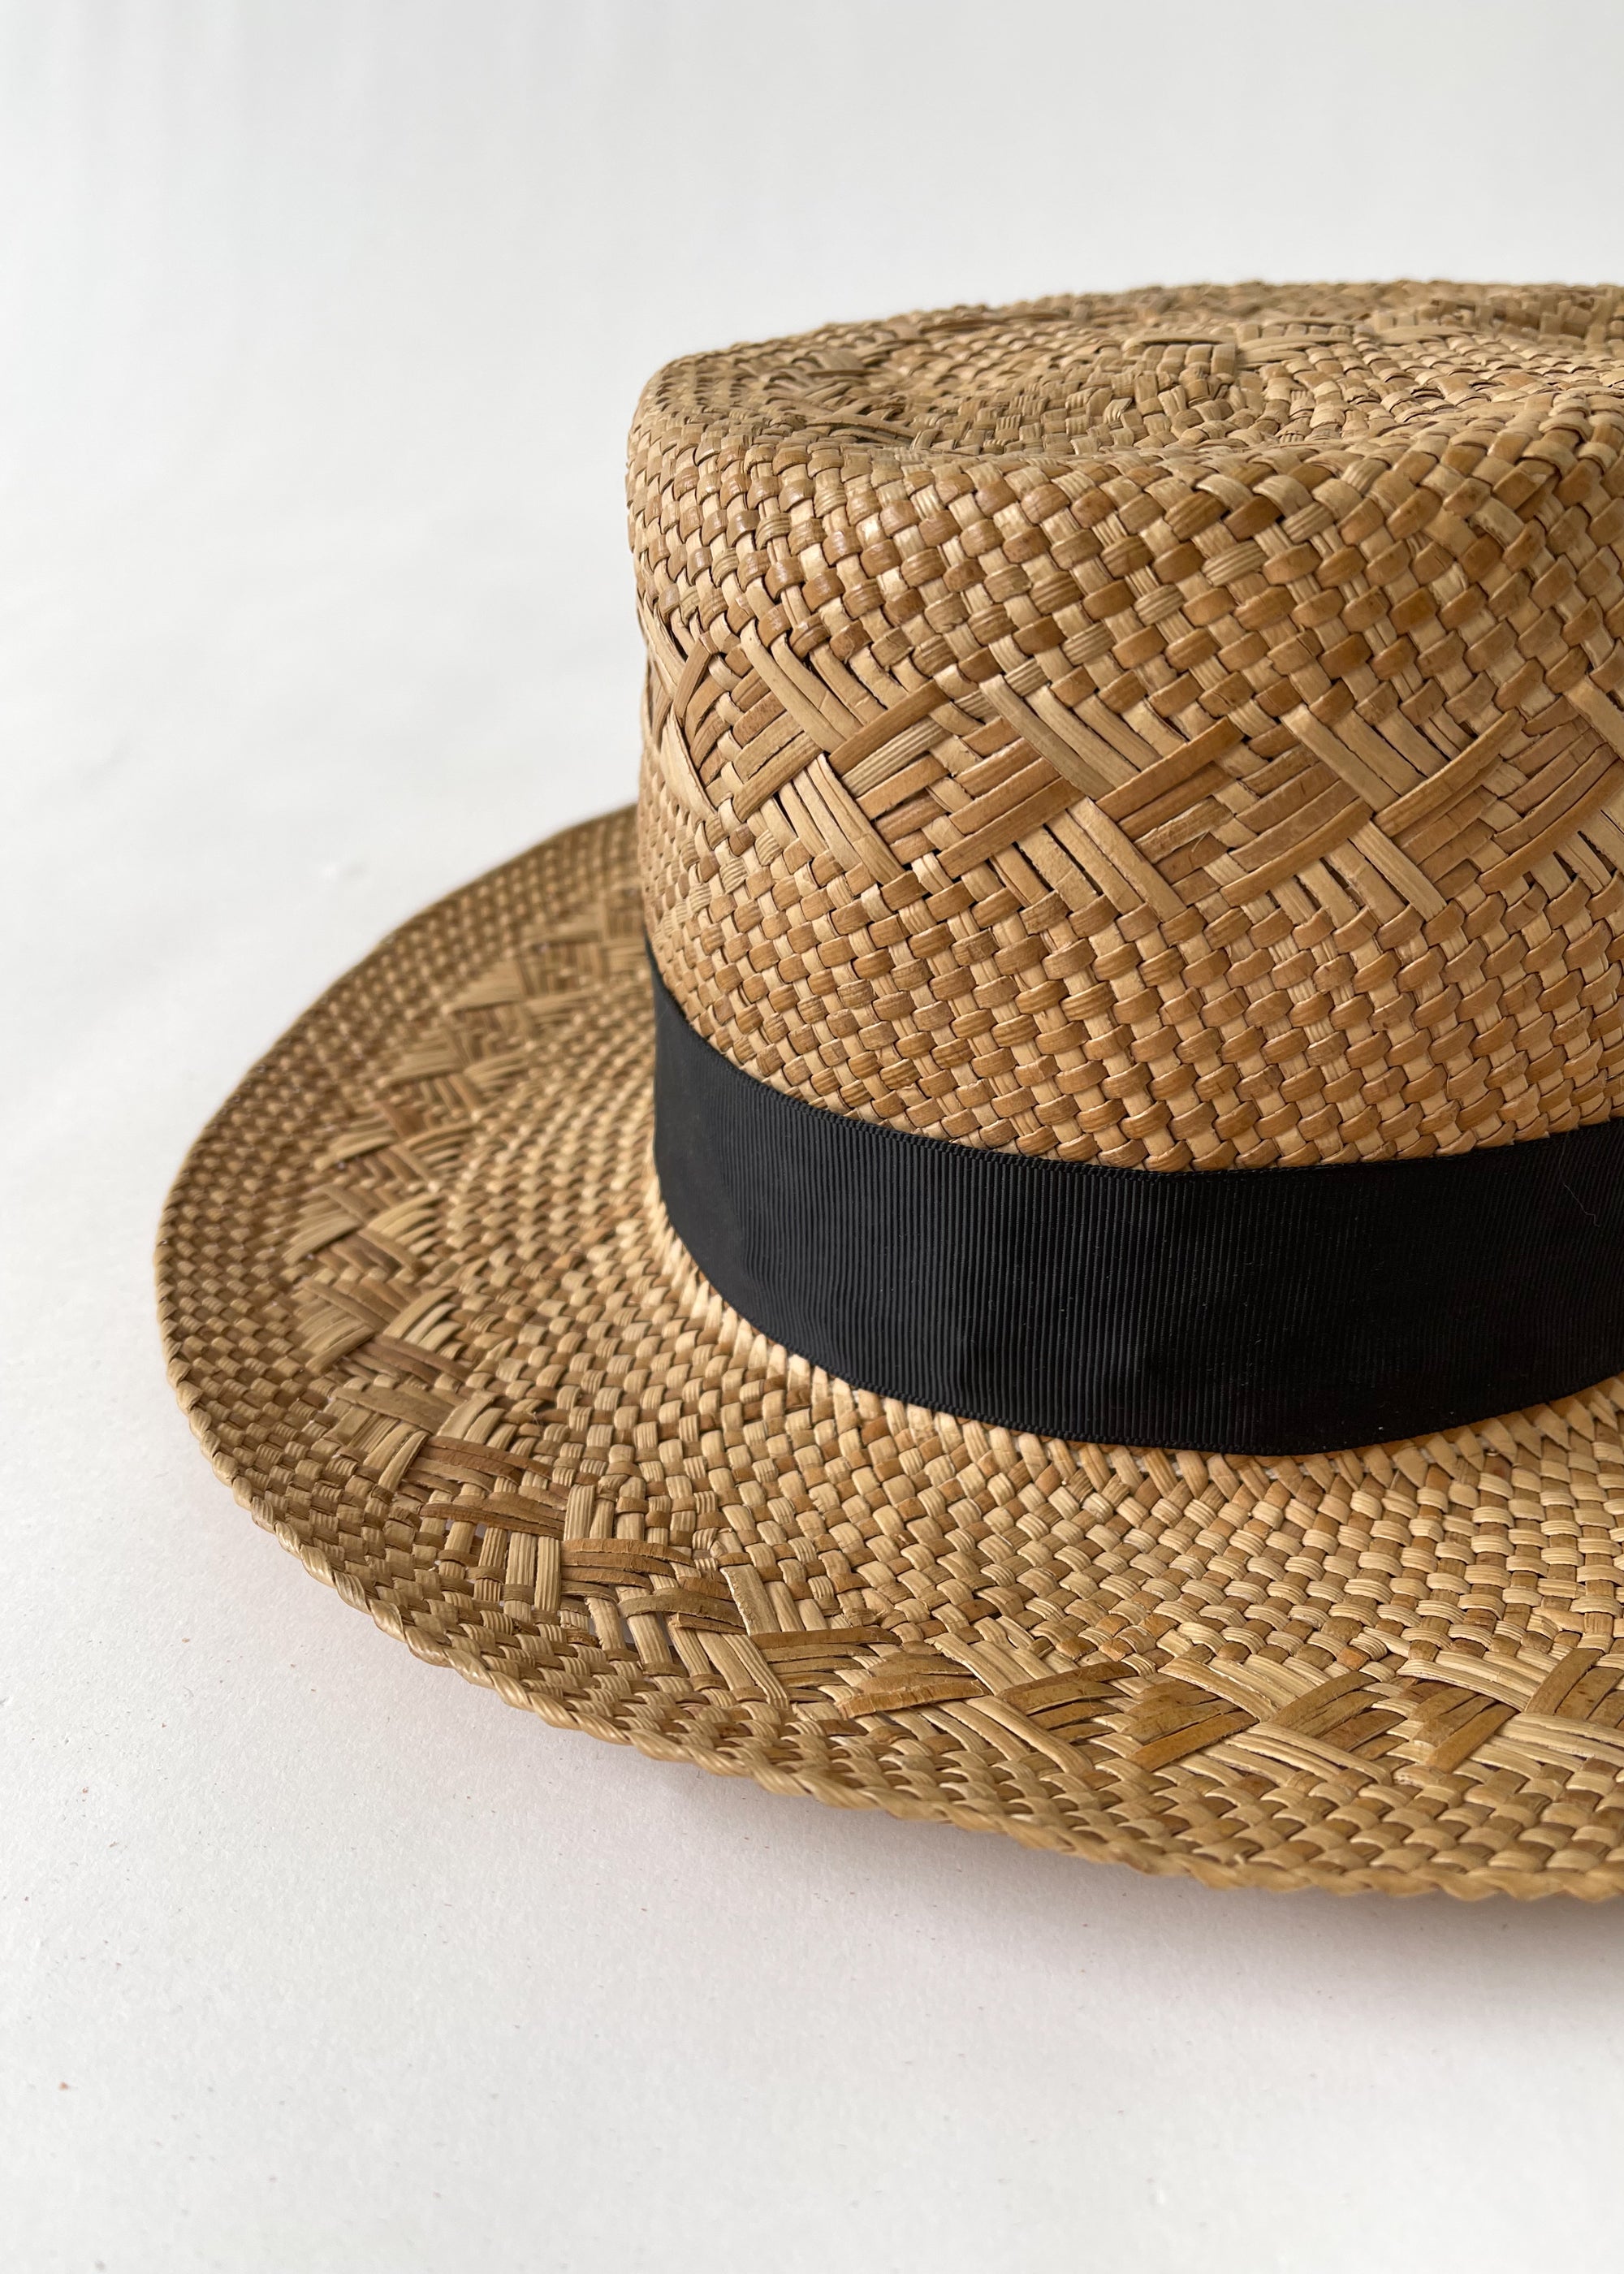 Vintage 1930s Stetson Straw Boater Hat - Raleigh Vintage